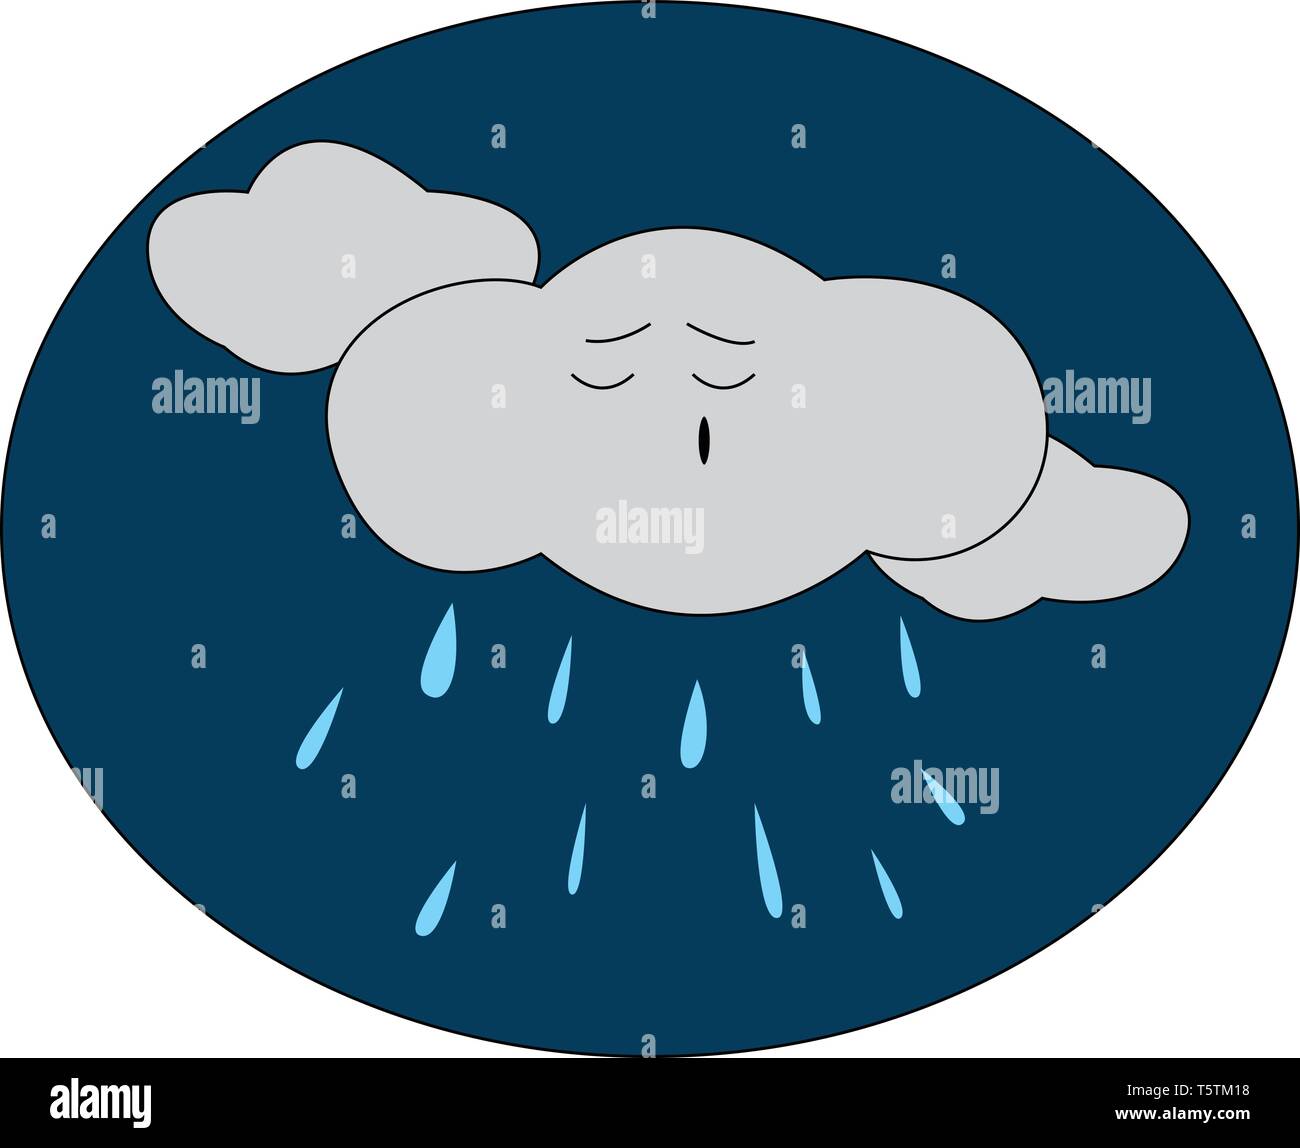 Cartoon of a rainy night with a grey-colored cloud among the other clouds dismayed while raining vector color drawing or illustration Stock Vector